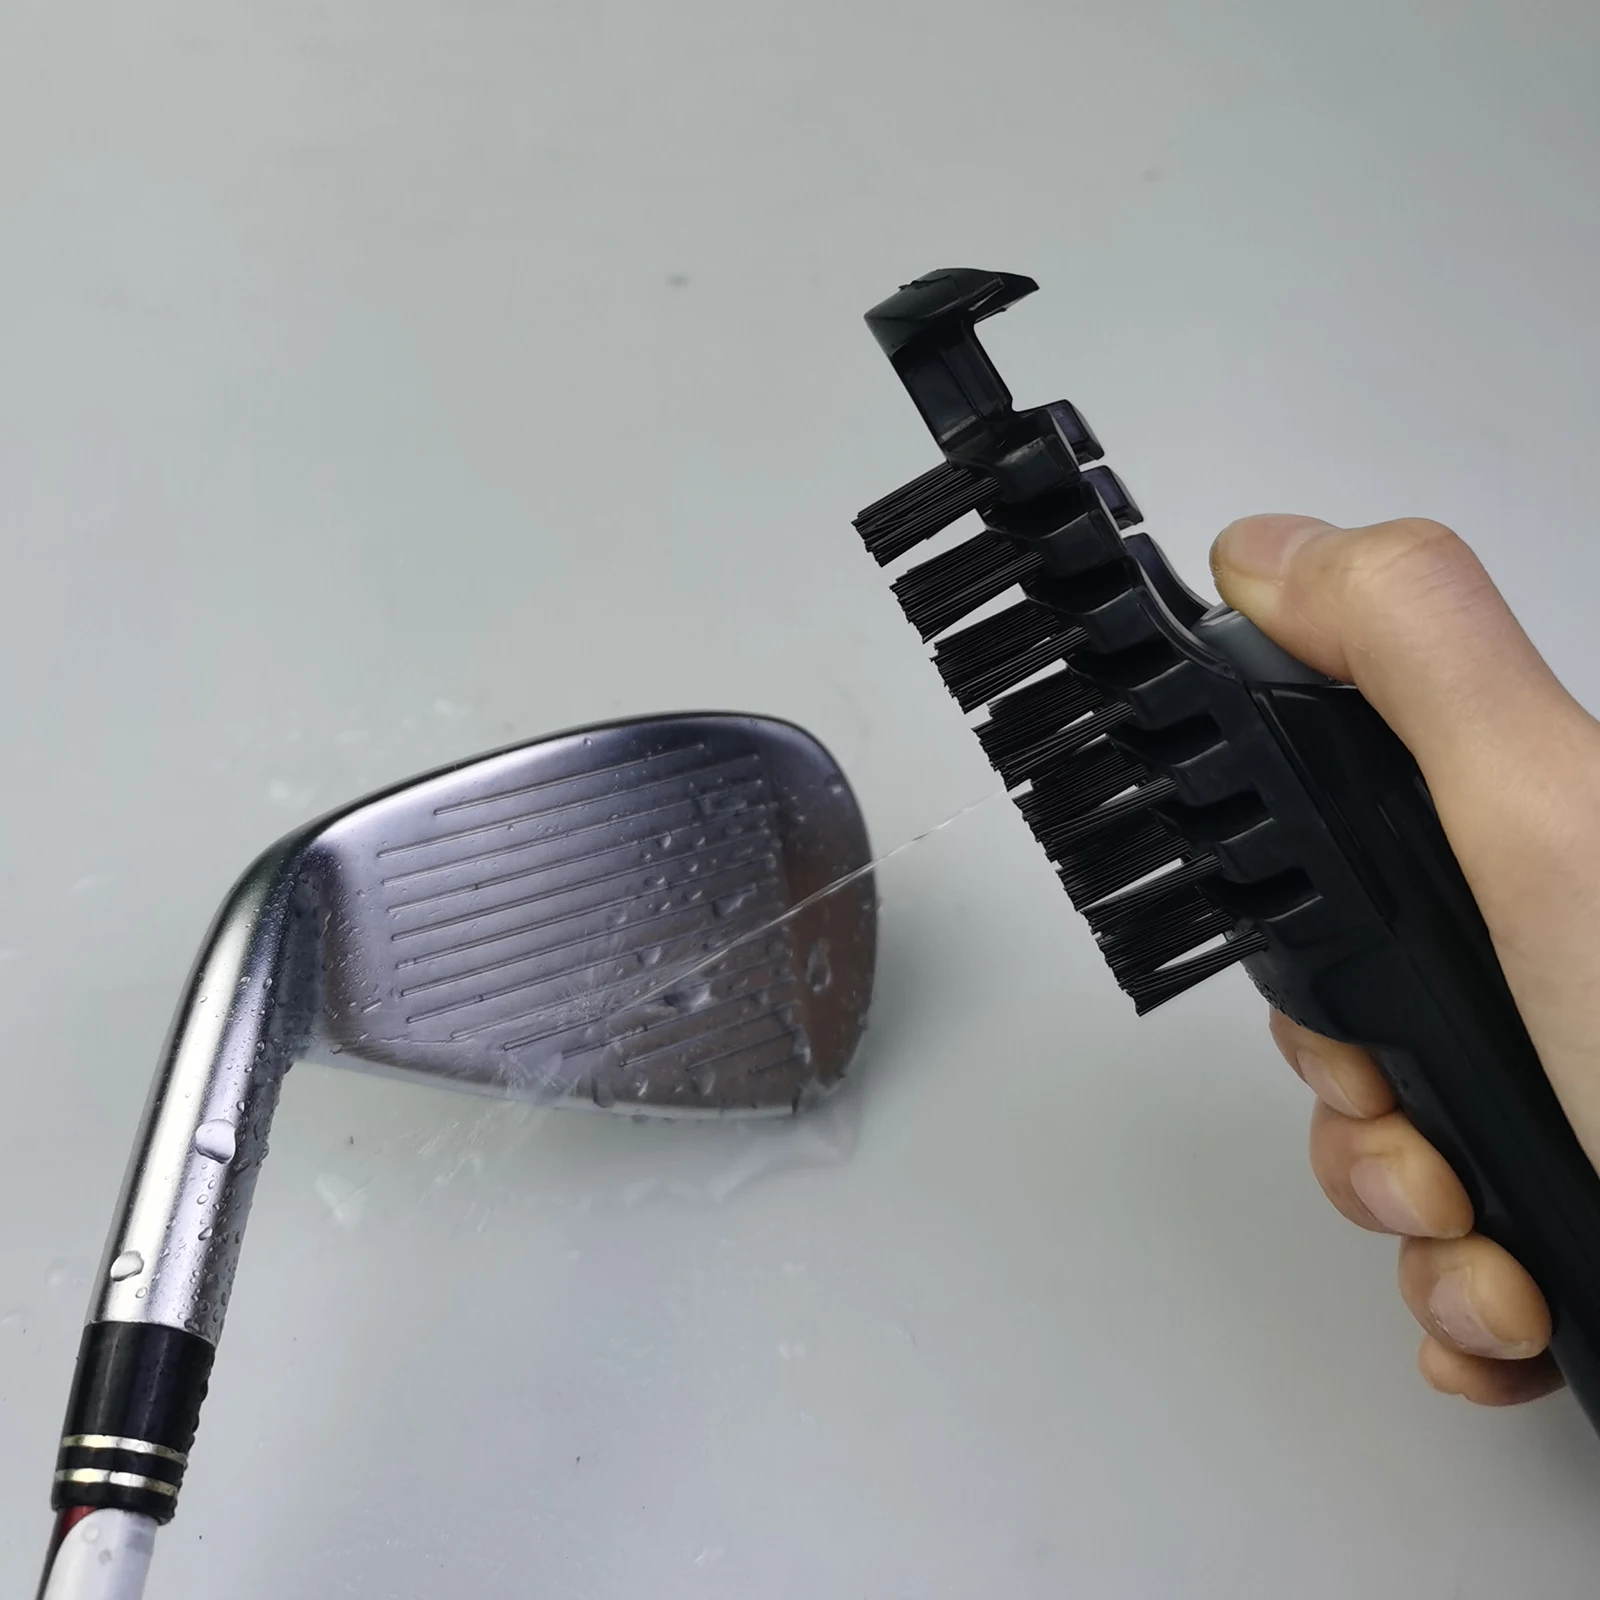 Solid Golf Club Brush Wet Water Spraying Cleaning Brushes, Portable Groove